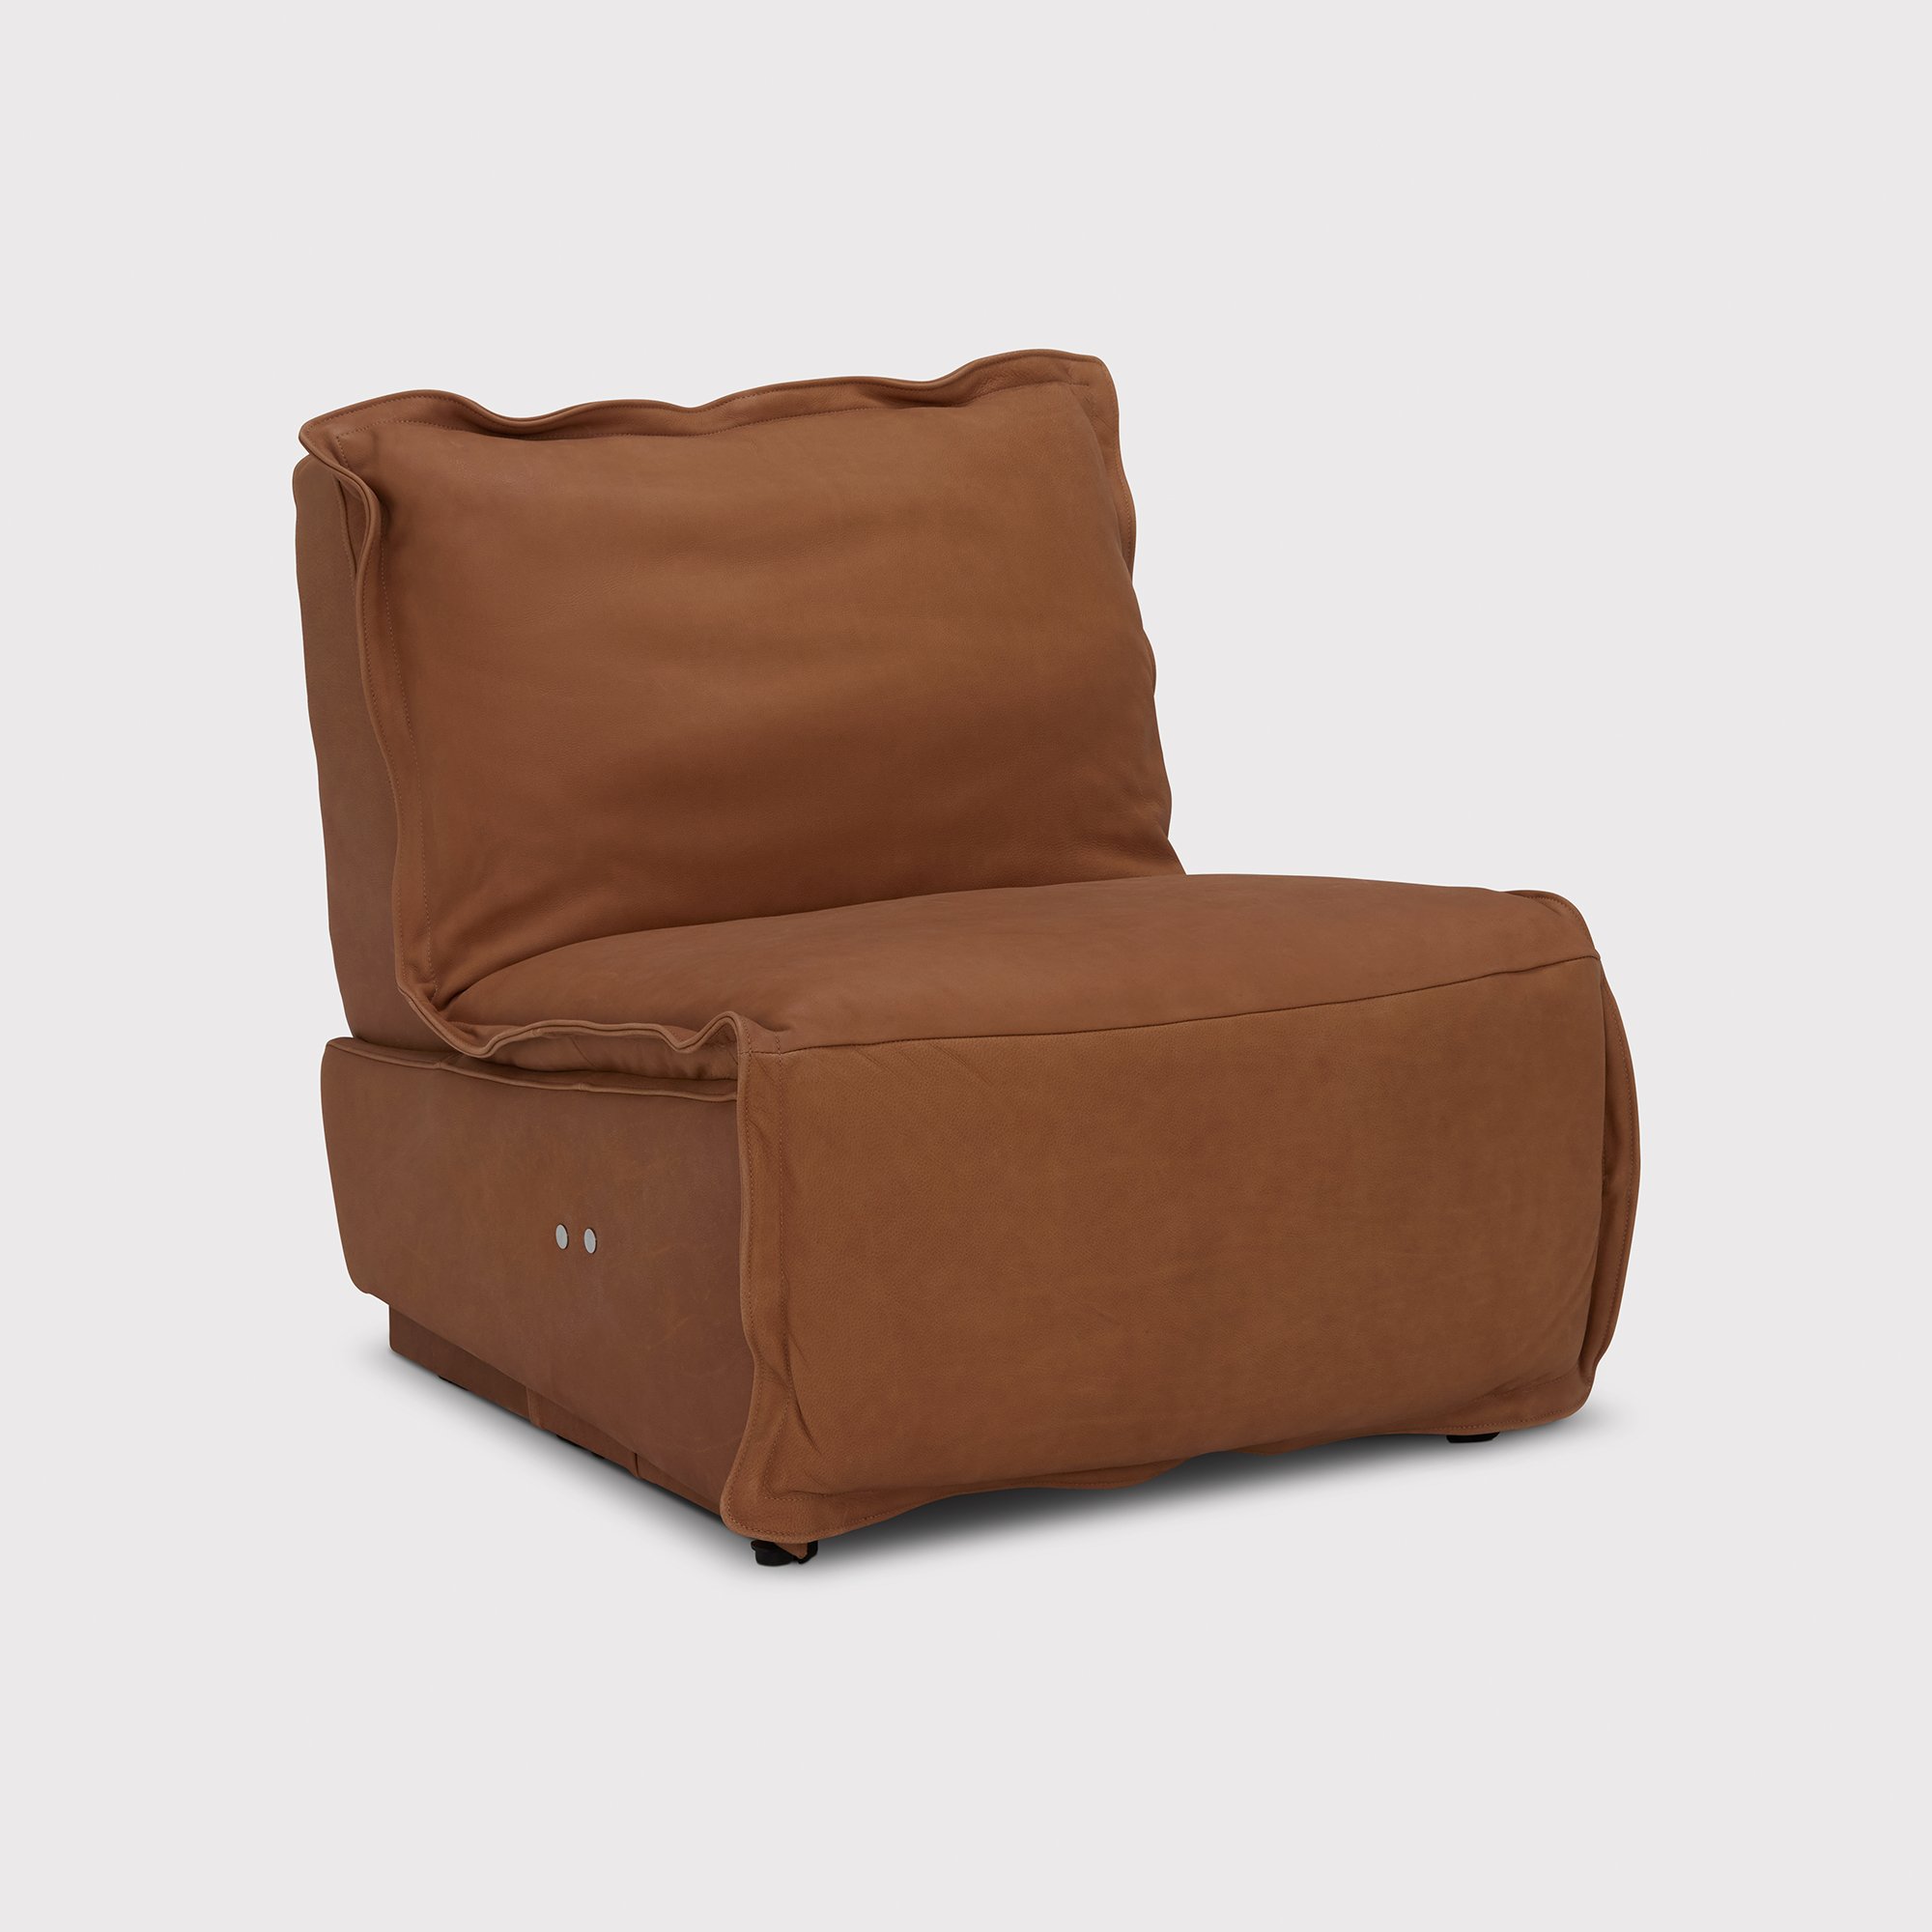 George Reclining Recliner Chair, Brown Leather | Barker & Stonehouse